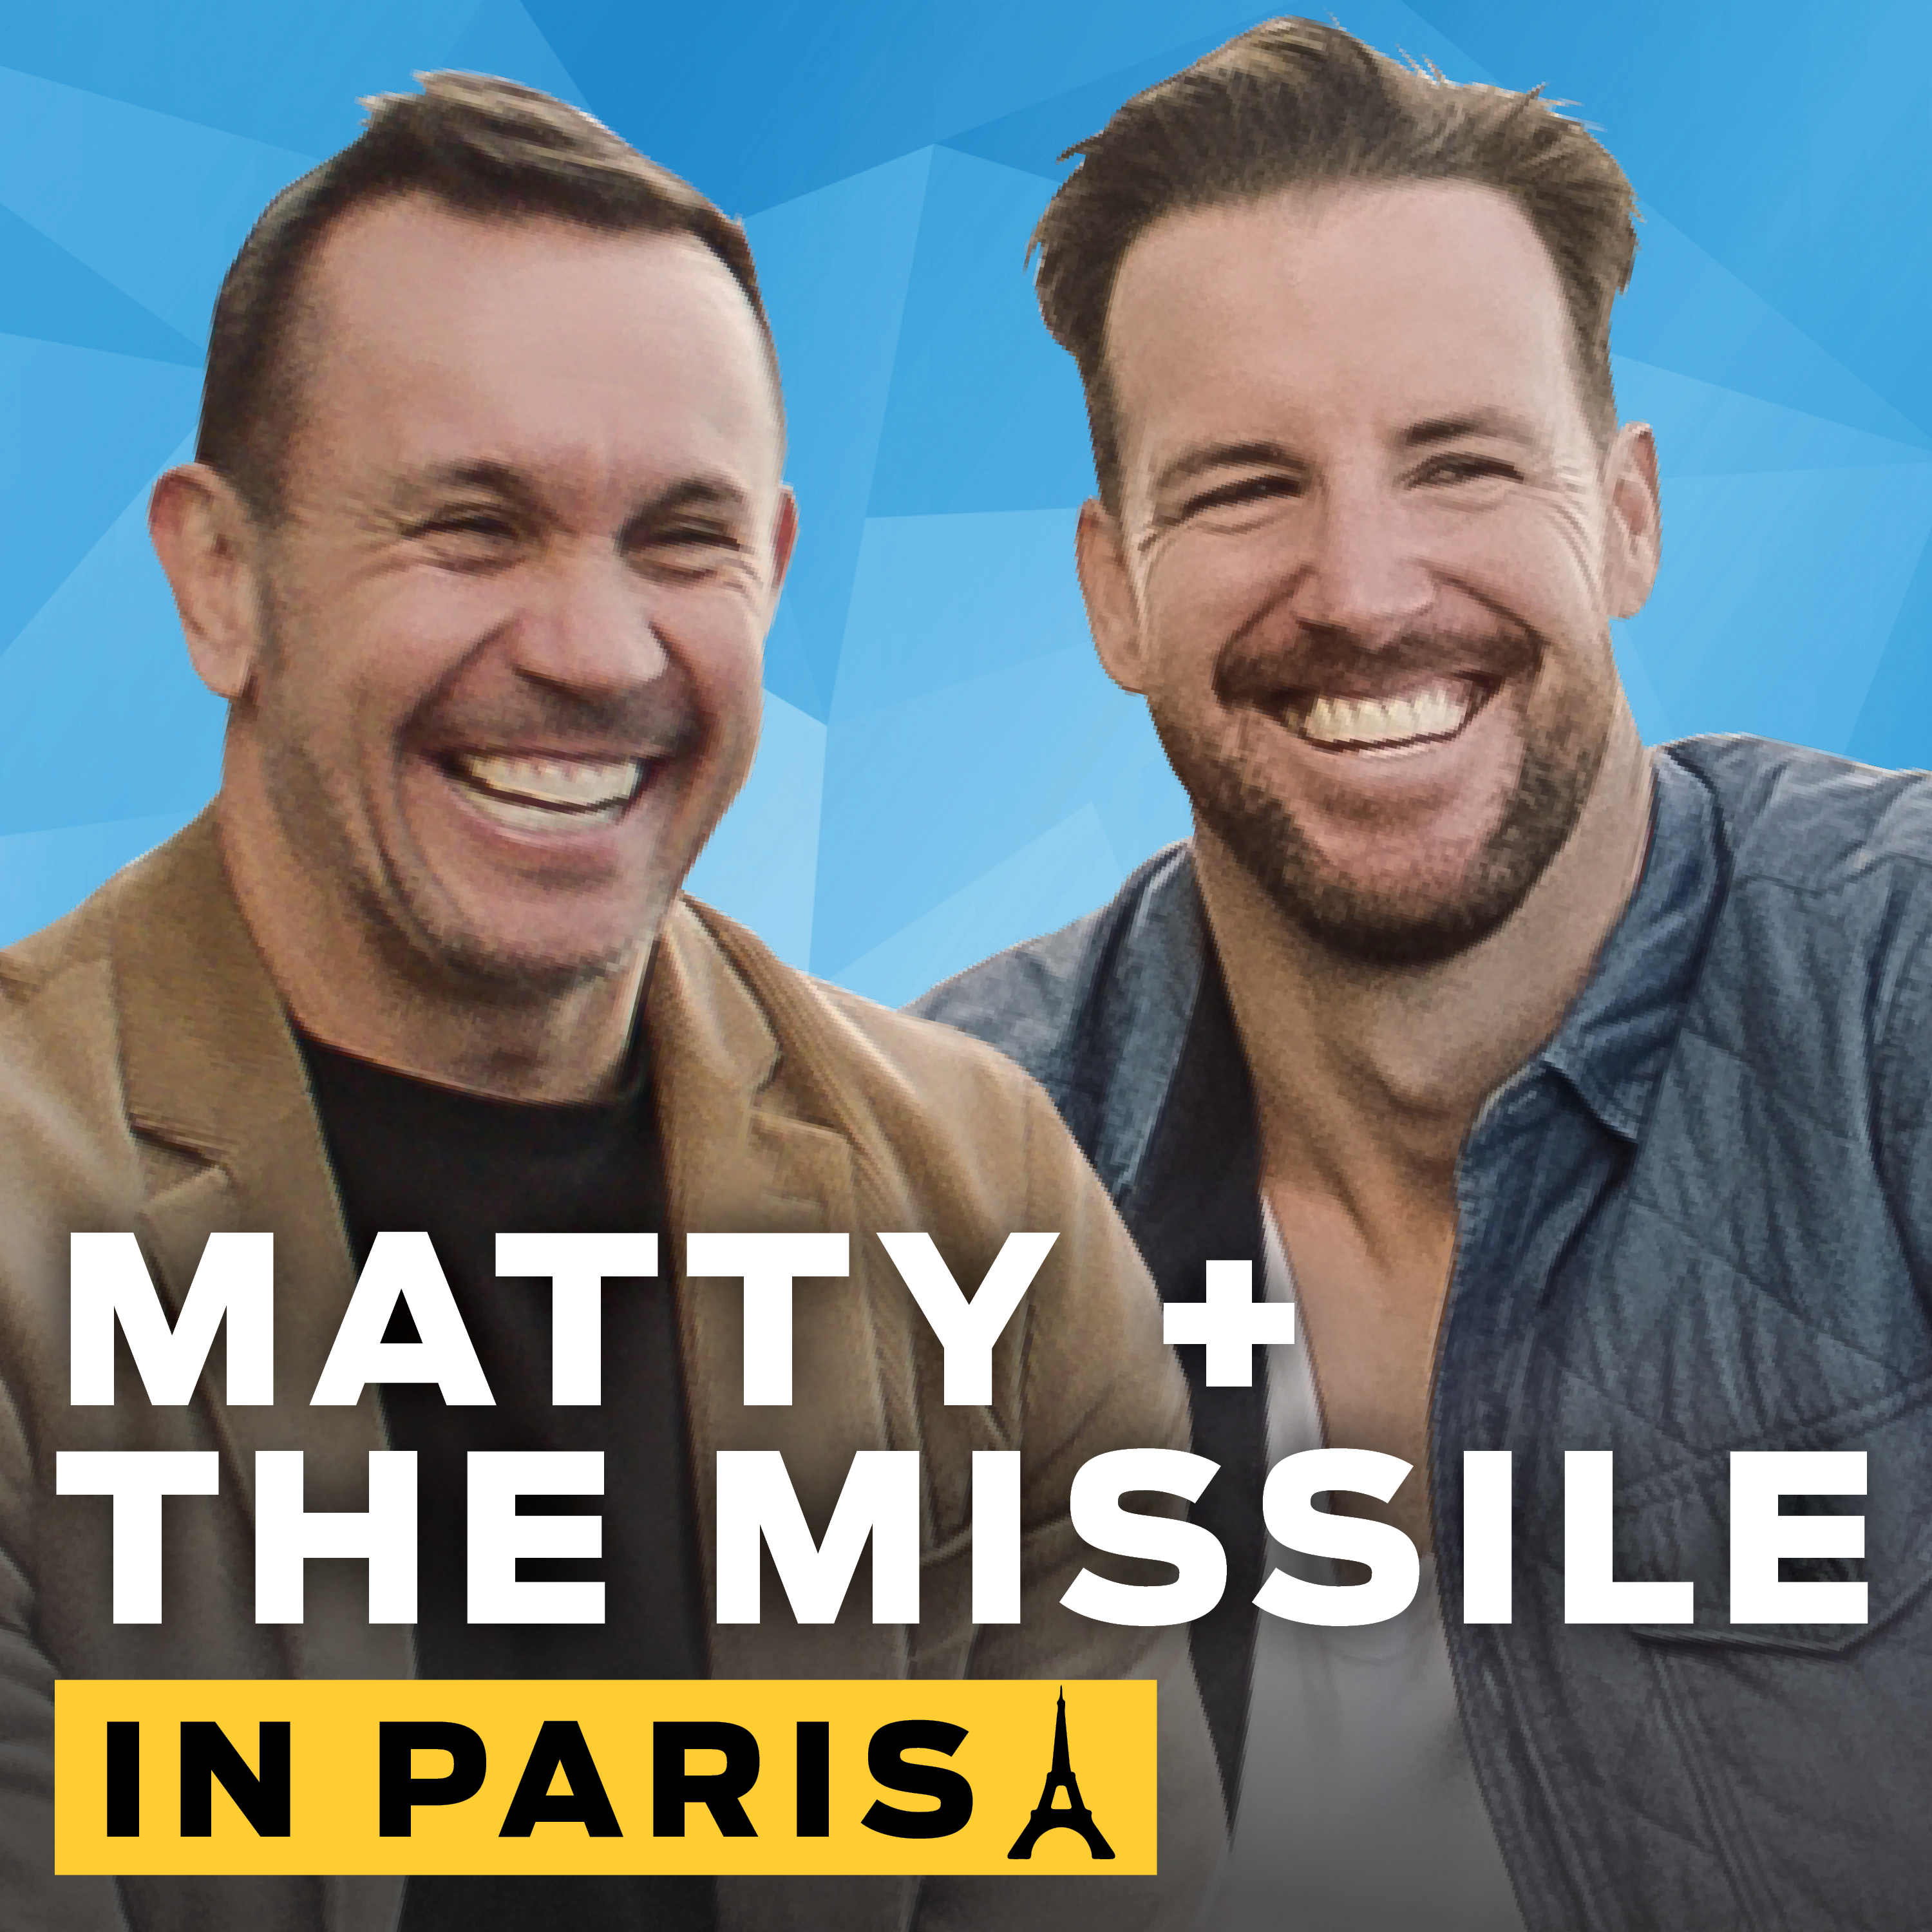 🇫🇷 Matty & the Missile in Paris: Witness the Titmus